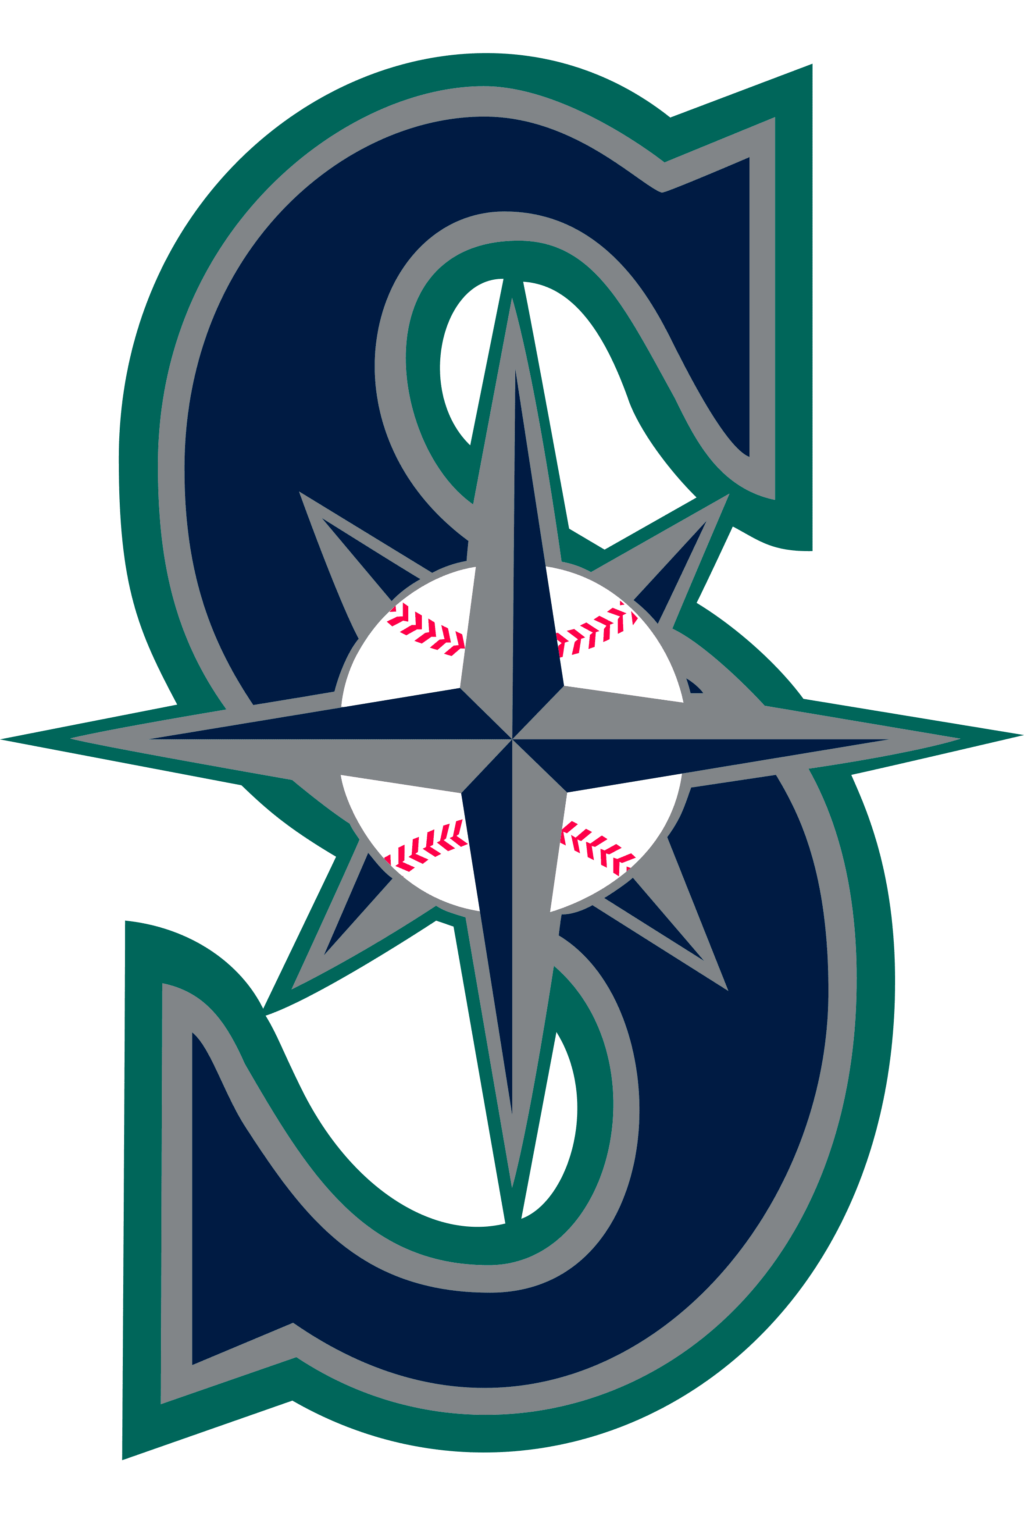 seattle mariners 10 1 12 Styles MLB Seattle Mariners Svg, Seattle Mariners Svg, Seattle Mariners Vector Logo, Seattle Mariners baseball Clipart, Seattle Mariners png, Seattle Mariners cricut files, baseball svg.